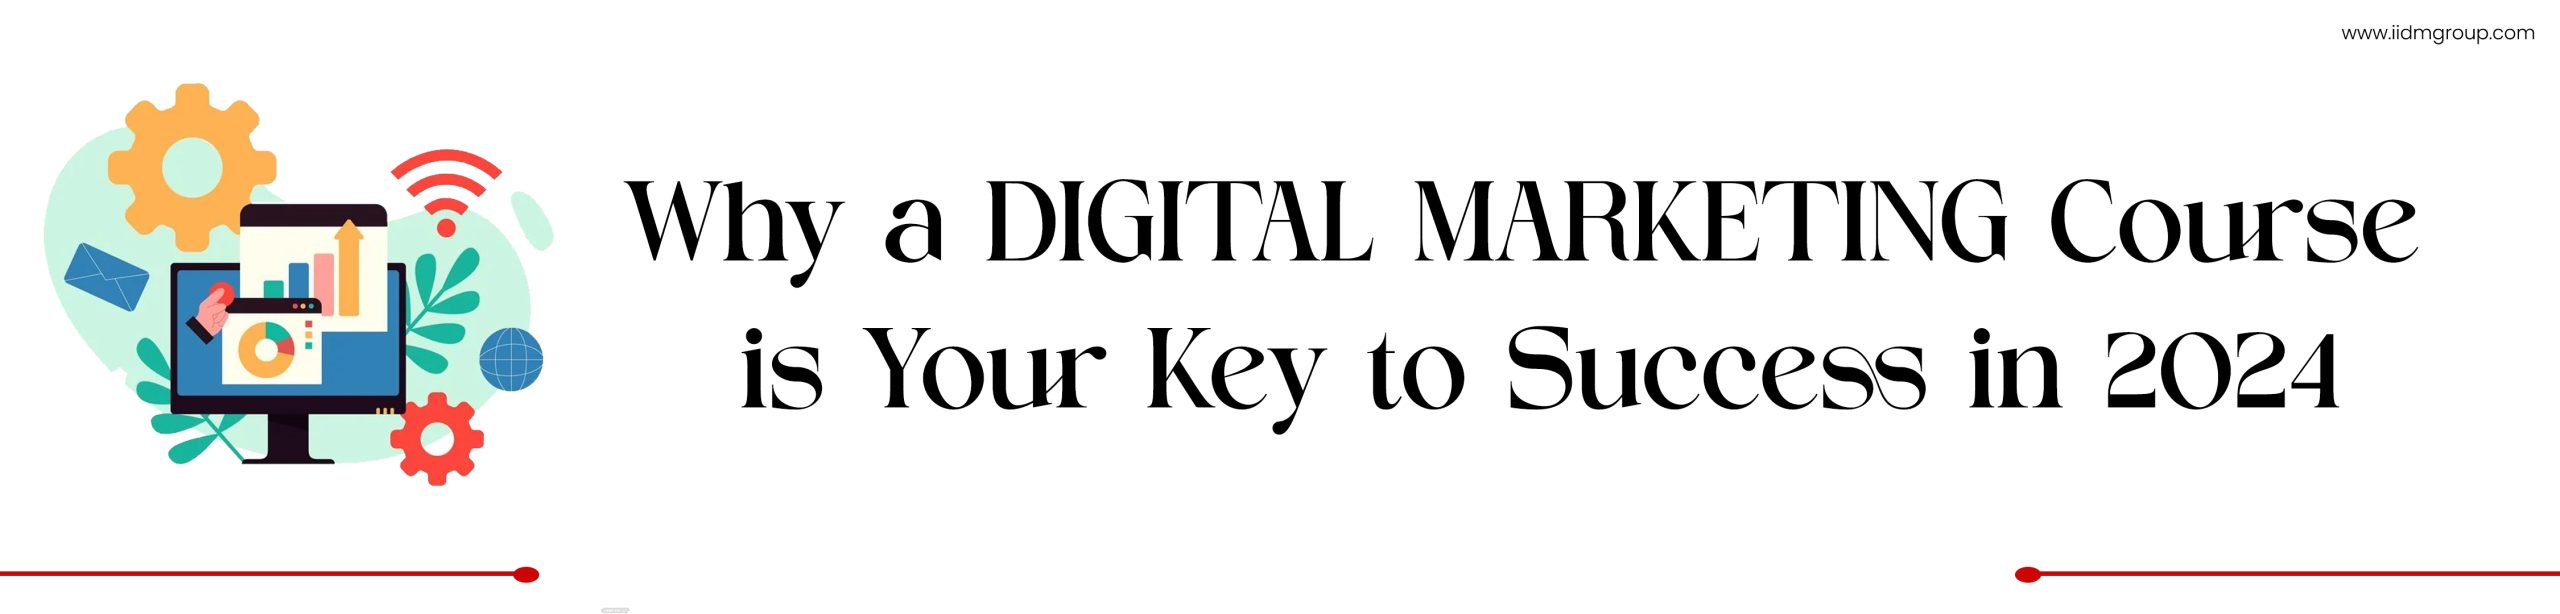 Why a Digital Marketing Course is Your Key to Success in 2024